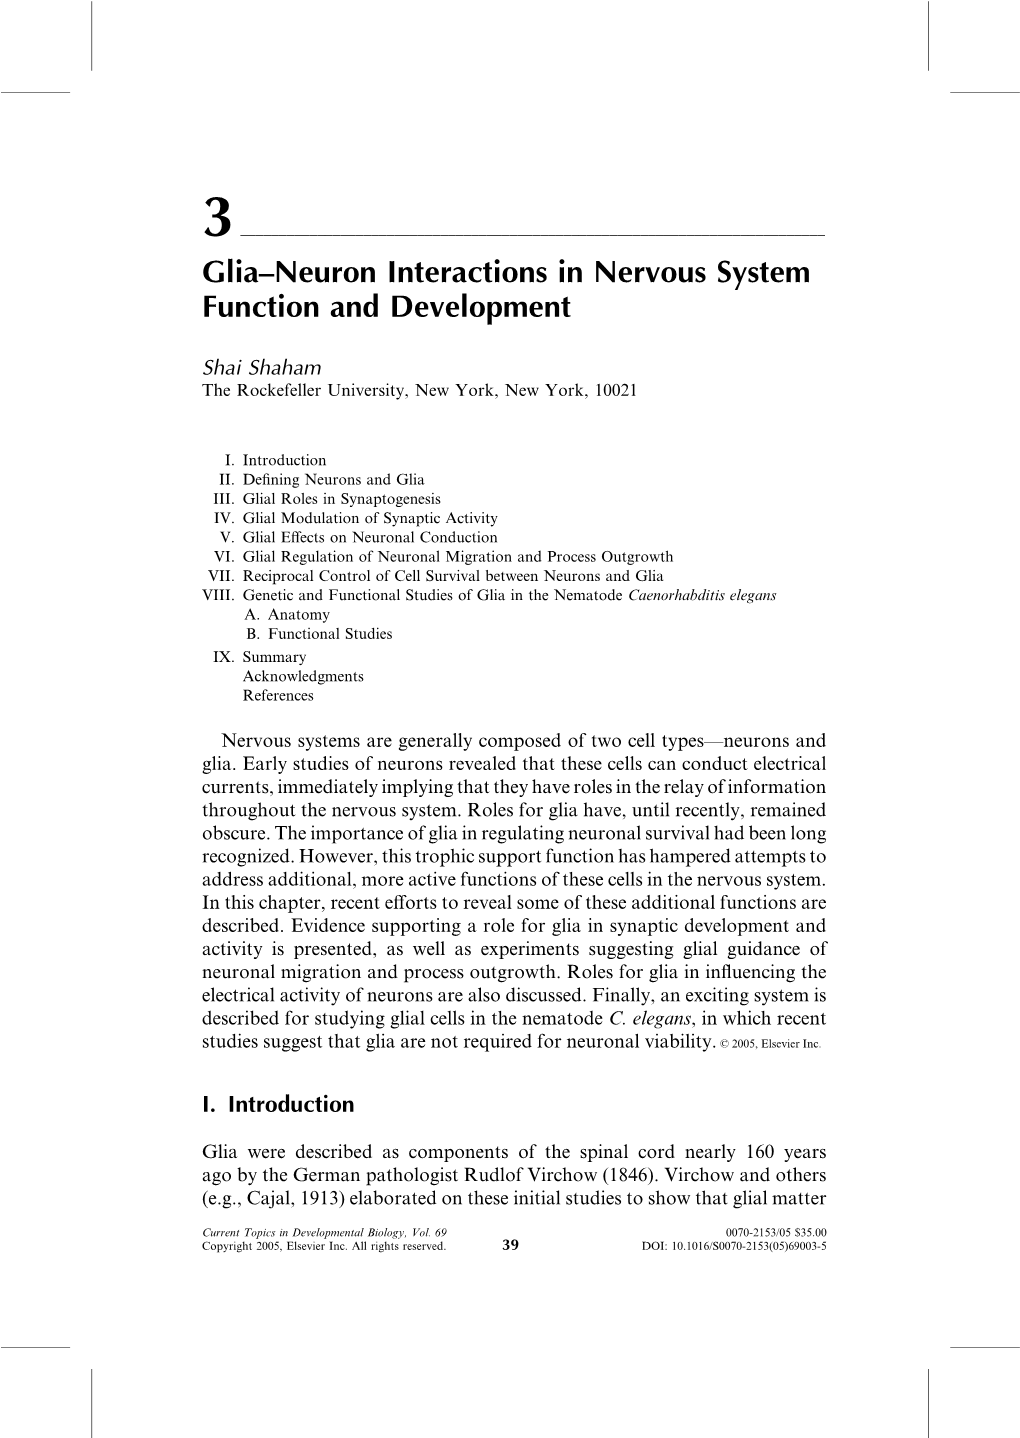 Glia–Neuron Interactions in Nervous System Function and Development